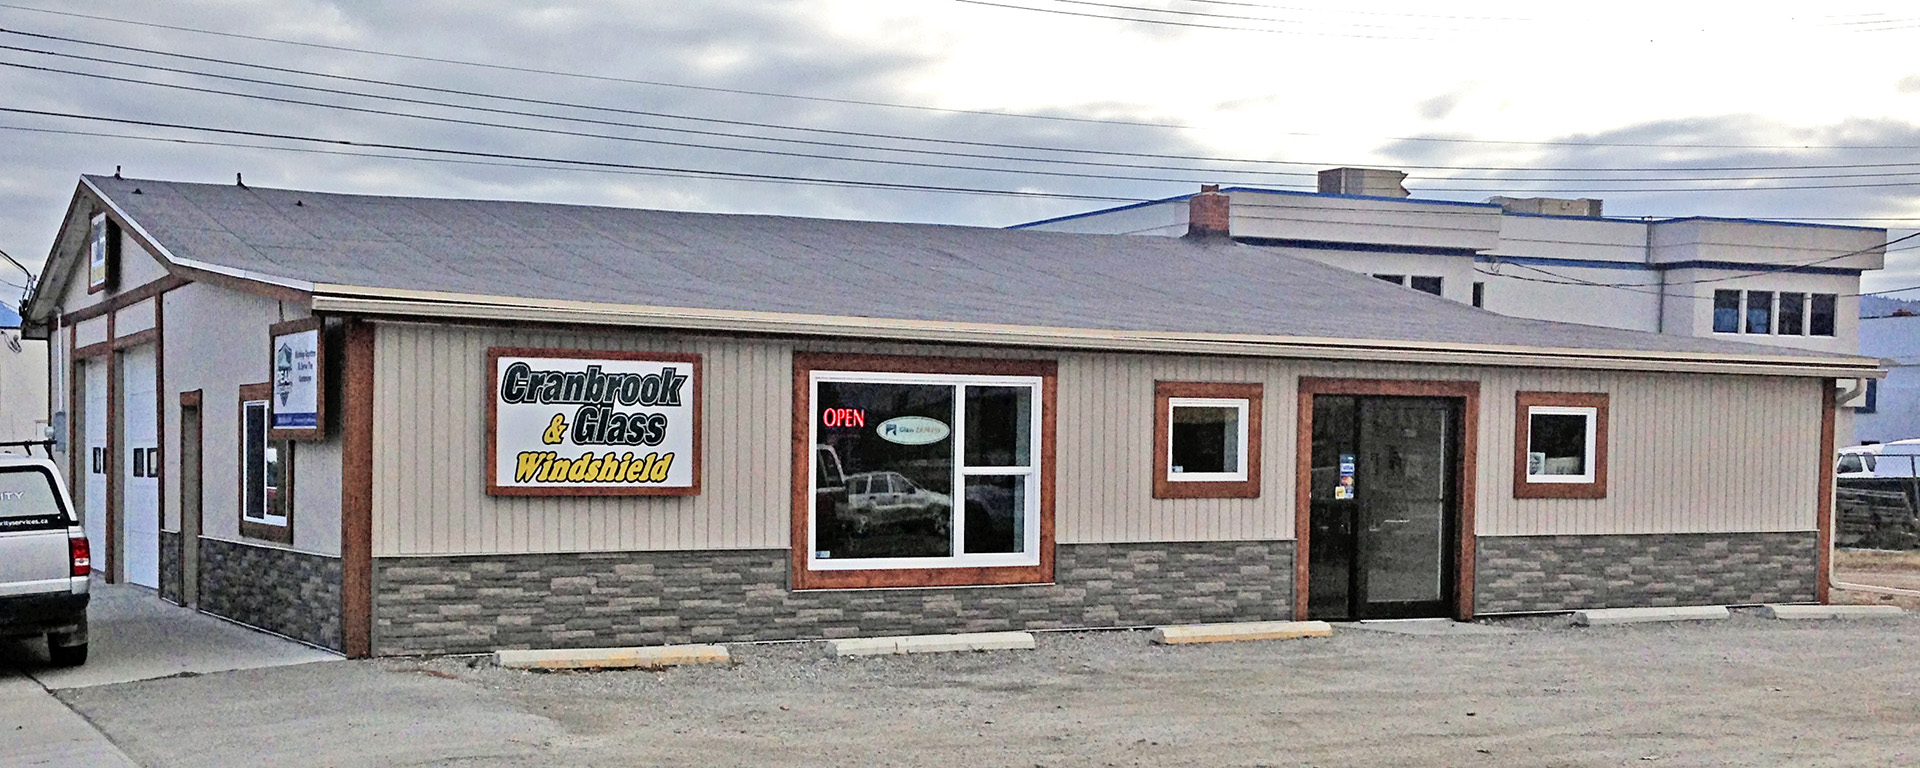 Exterior building for Cranbrook Glass and Windshield 